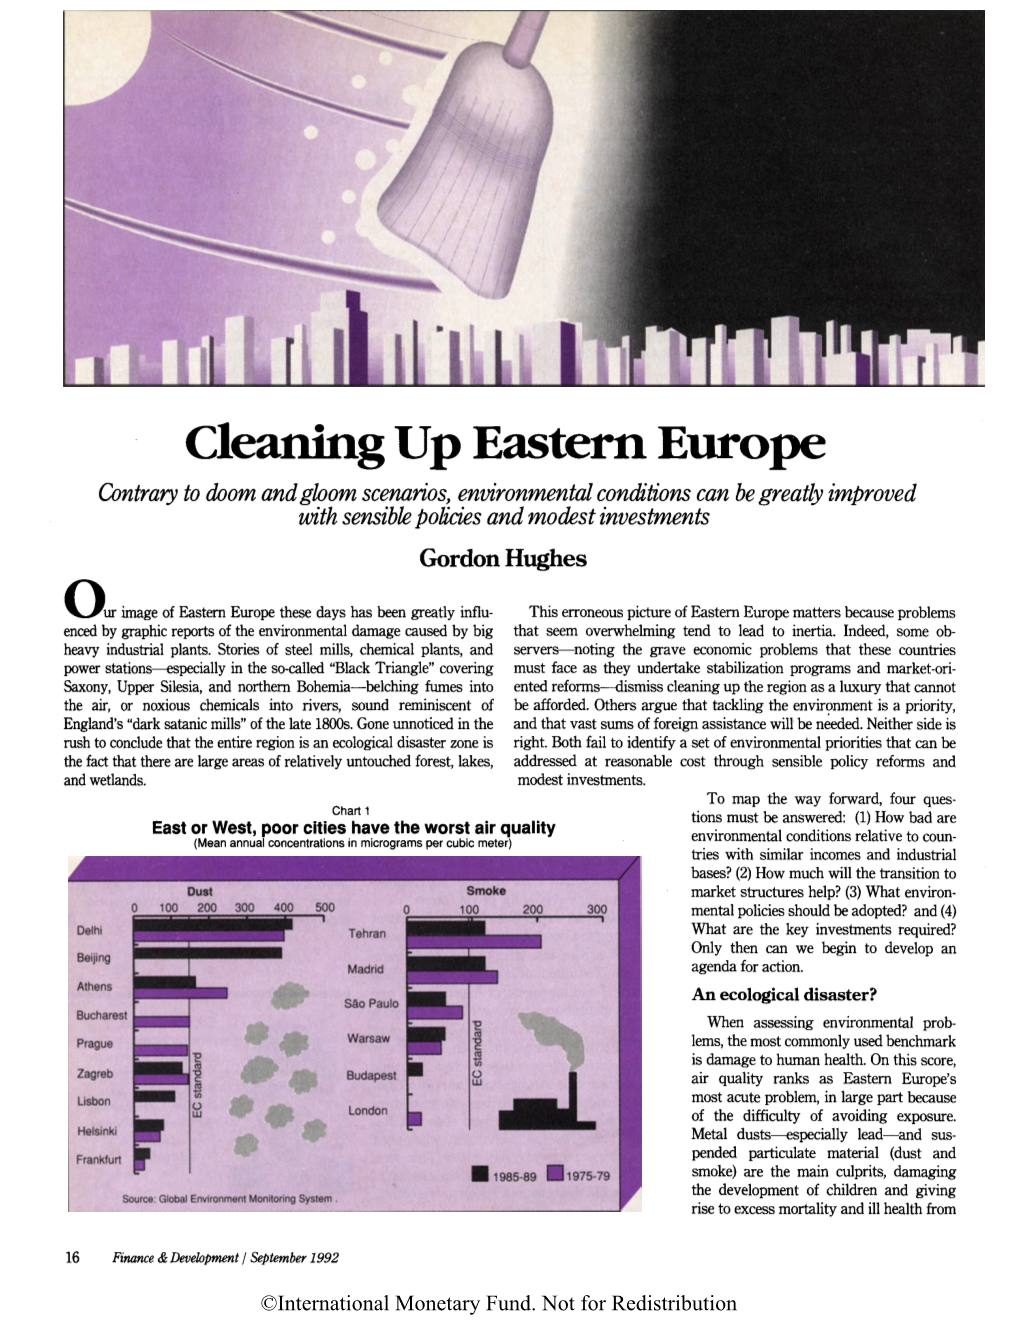 Cleaning up Eastern Europe